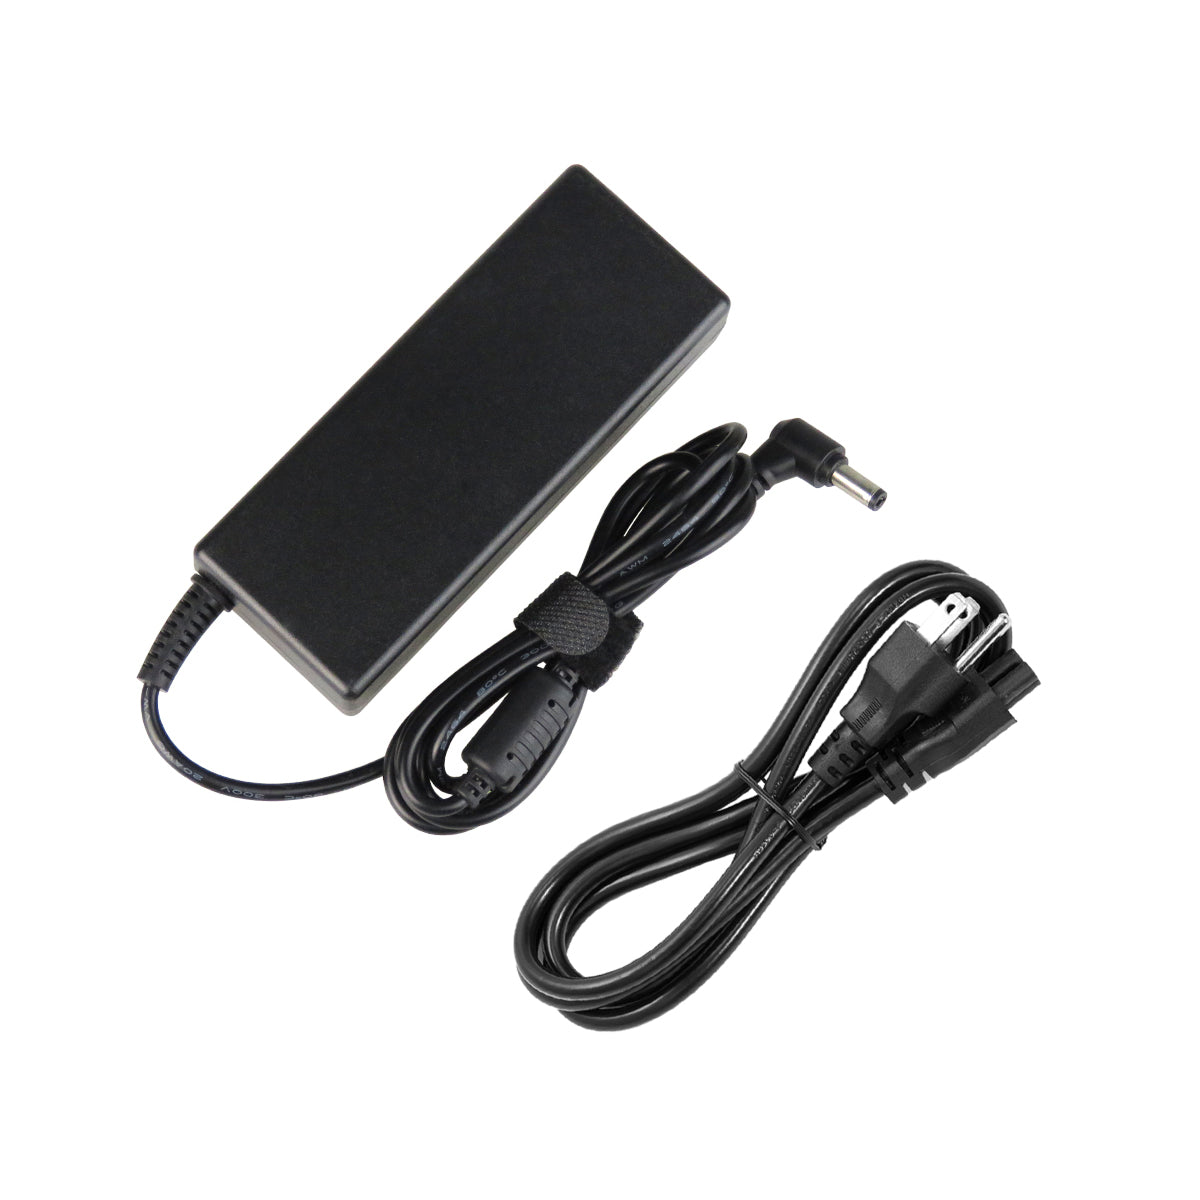 AC Adapter Charger for ASUS A43TK Notebook.